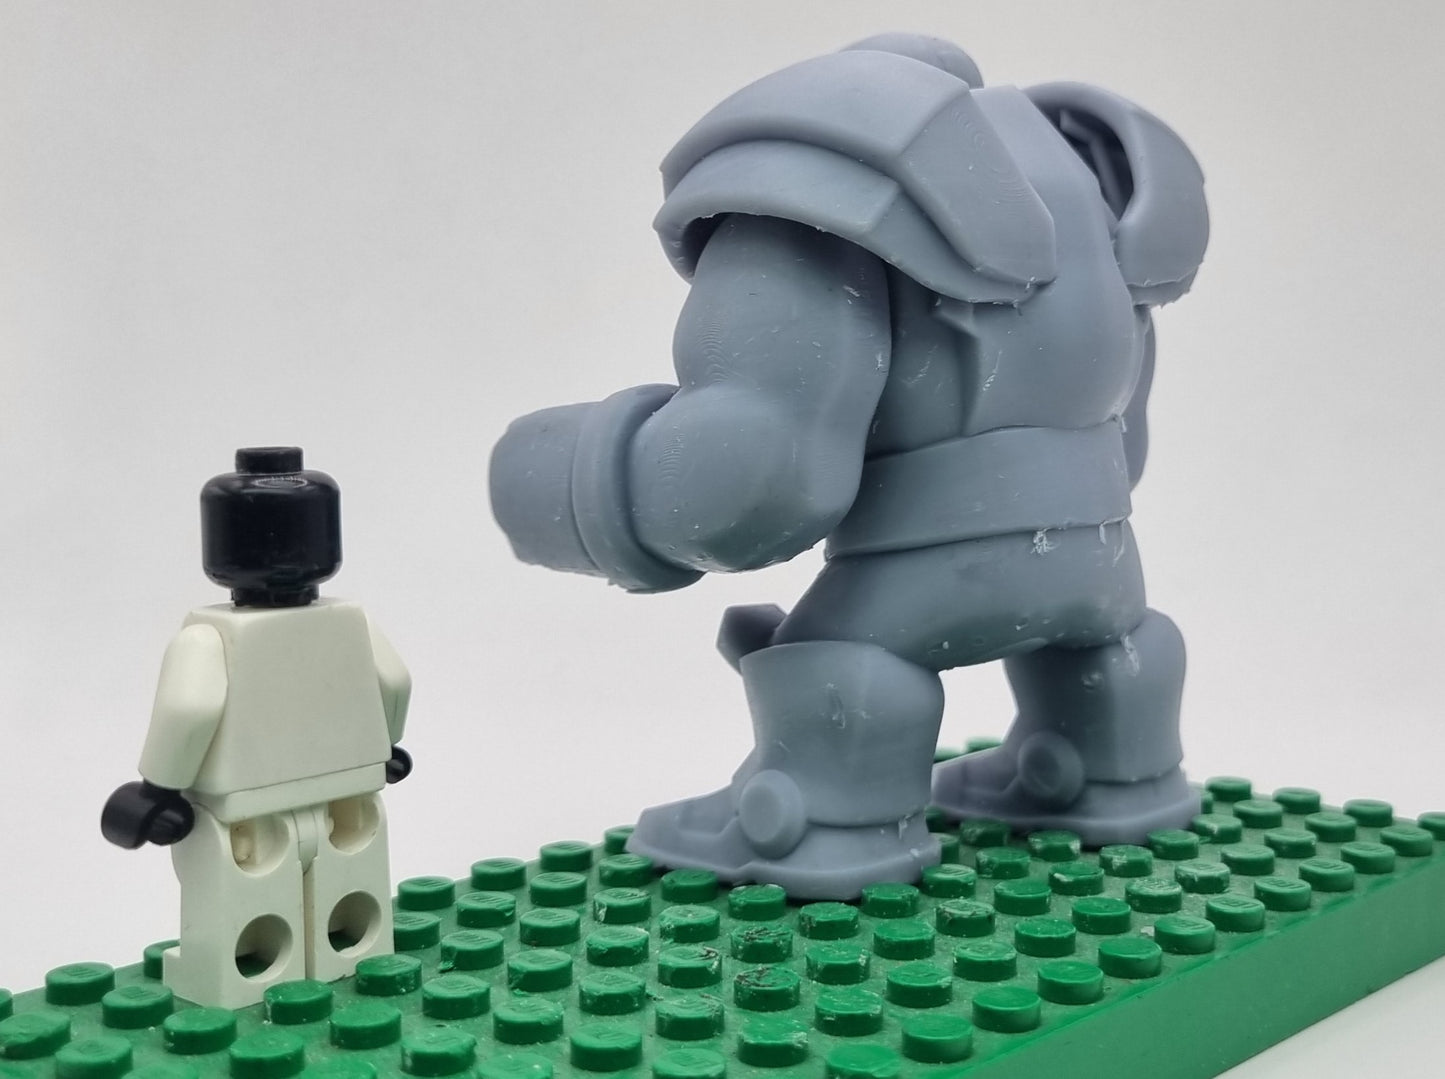 Building toy custom 3D printed super hero ancient mutated god!